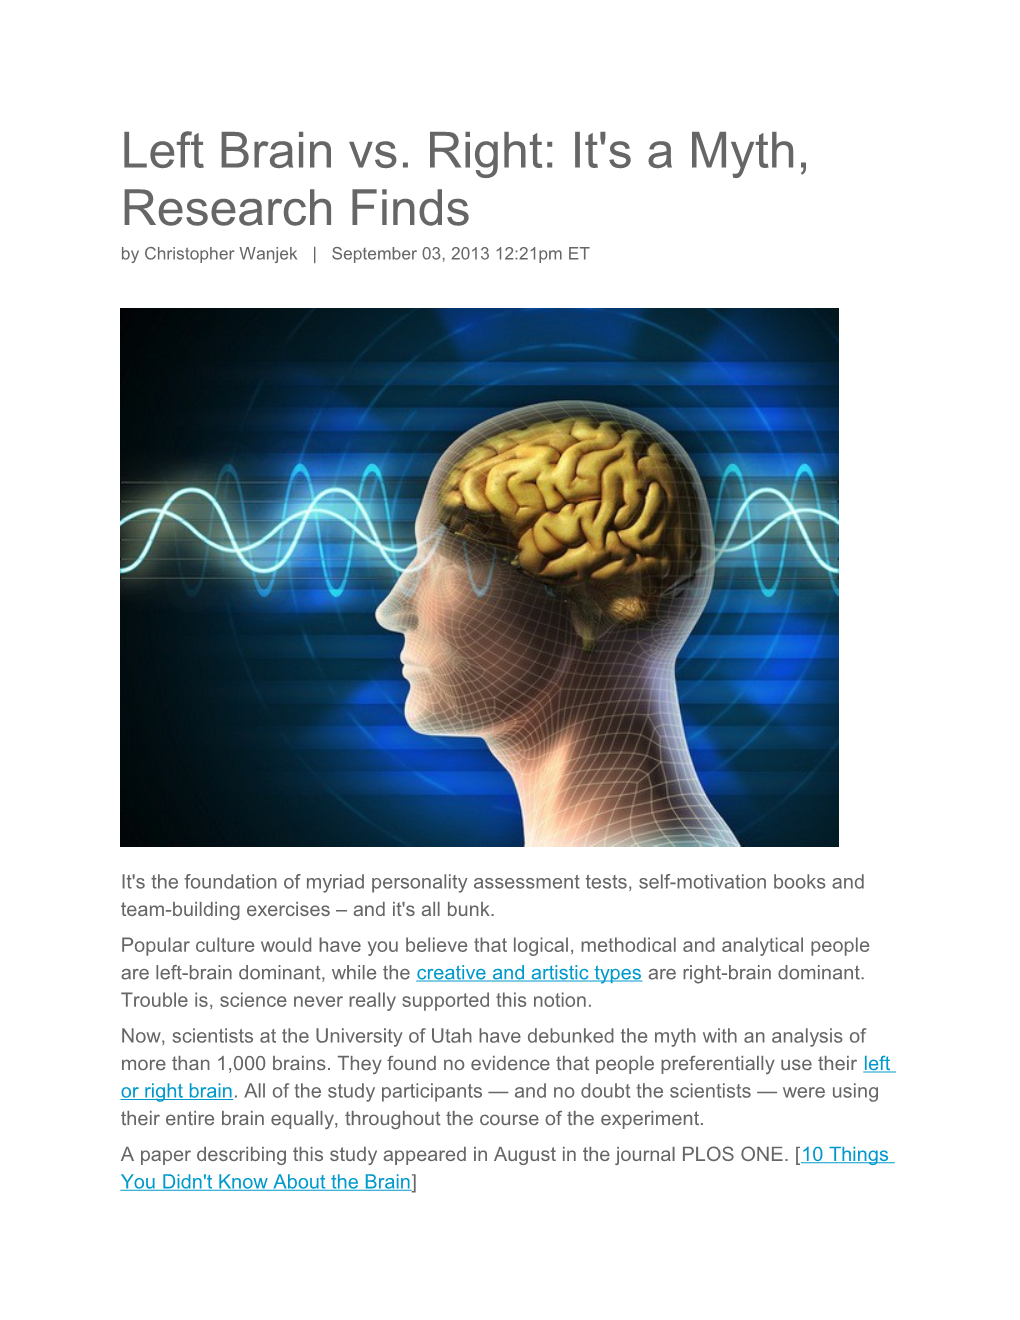 Left Brain Vs. Right: It's a Myth, Research Finds